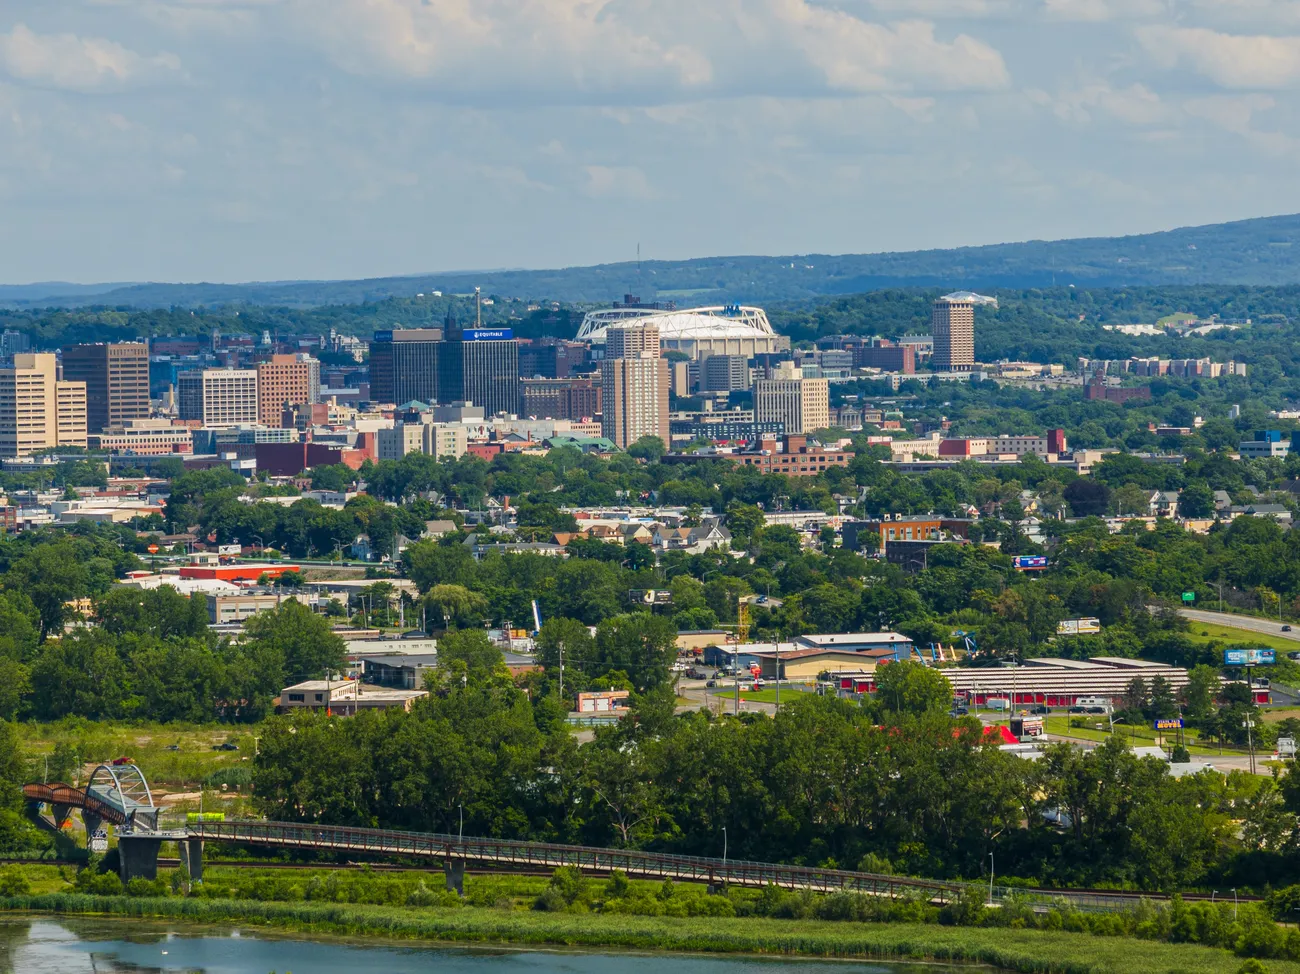 Drone shot overlooking the City of Syracuse.